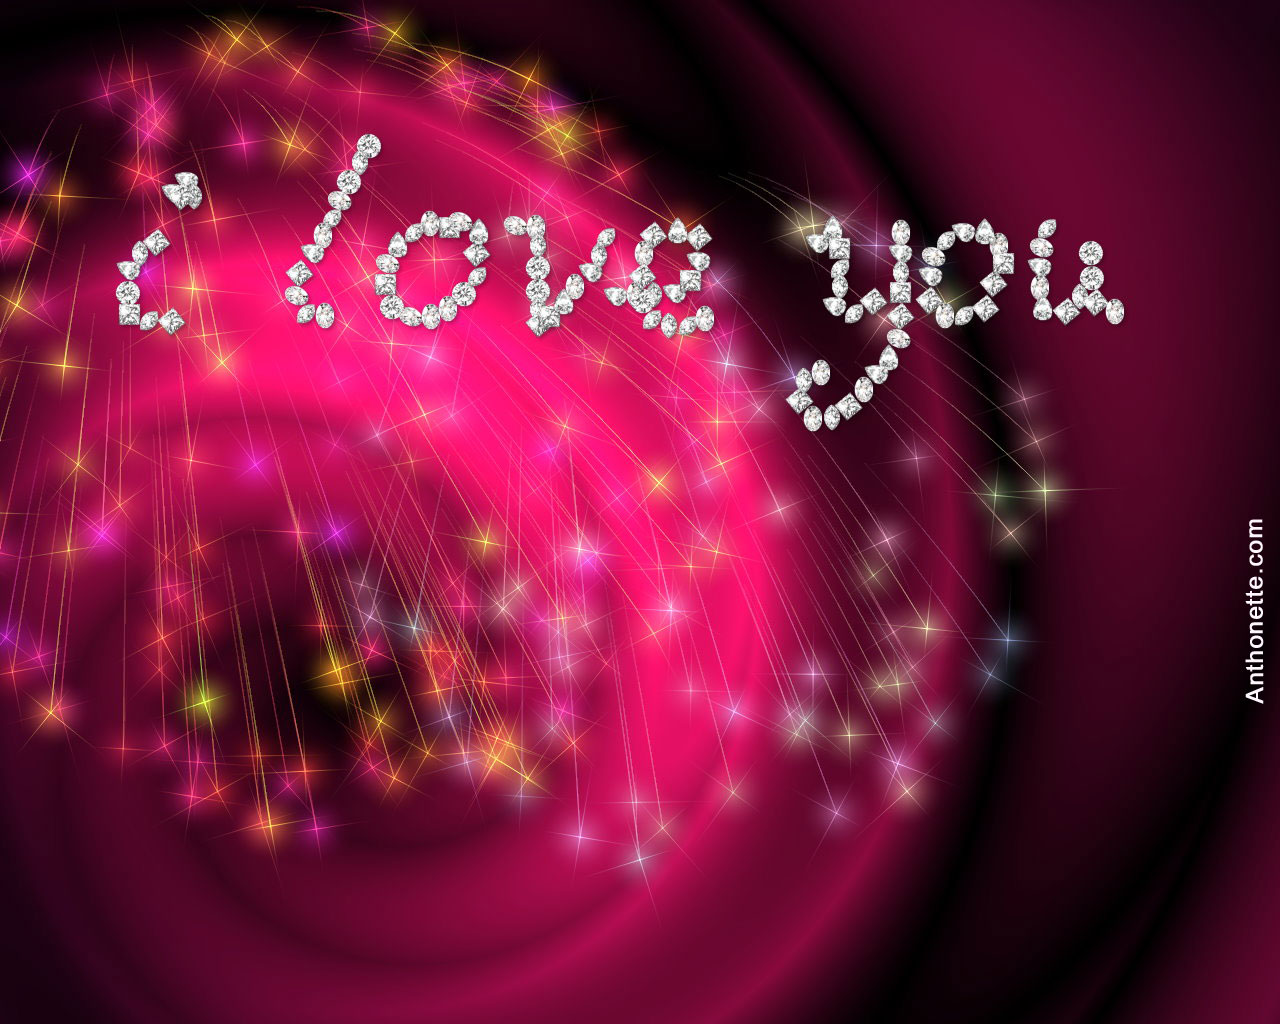 Free download wallpapers hd love you wallpapers hd love you ...